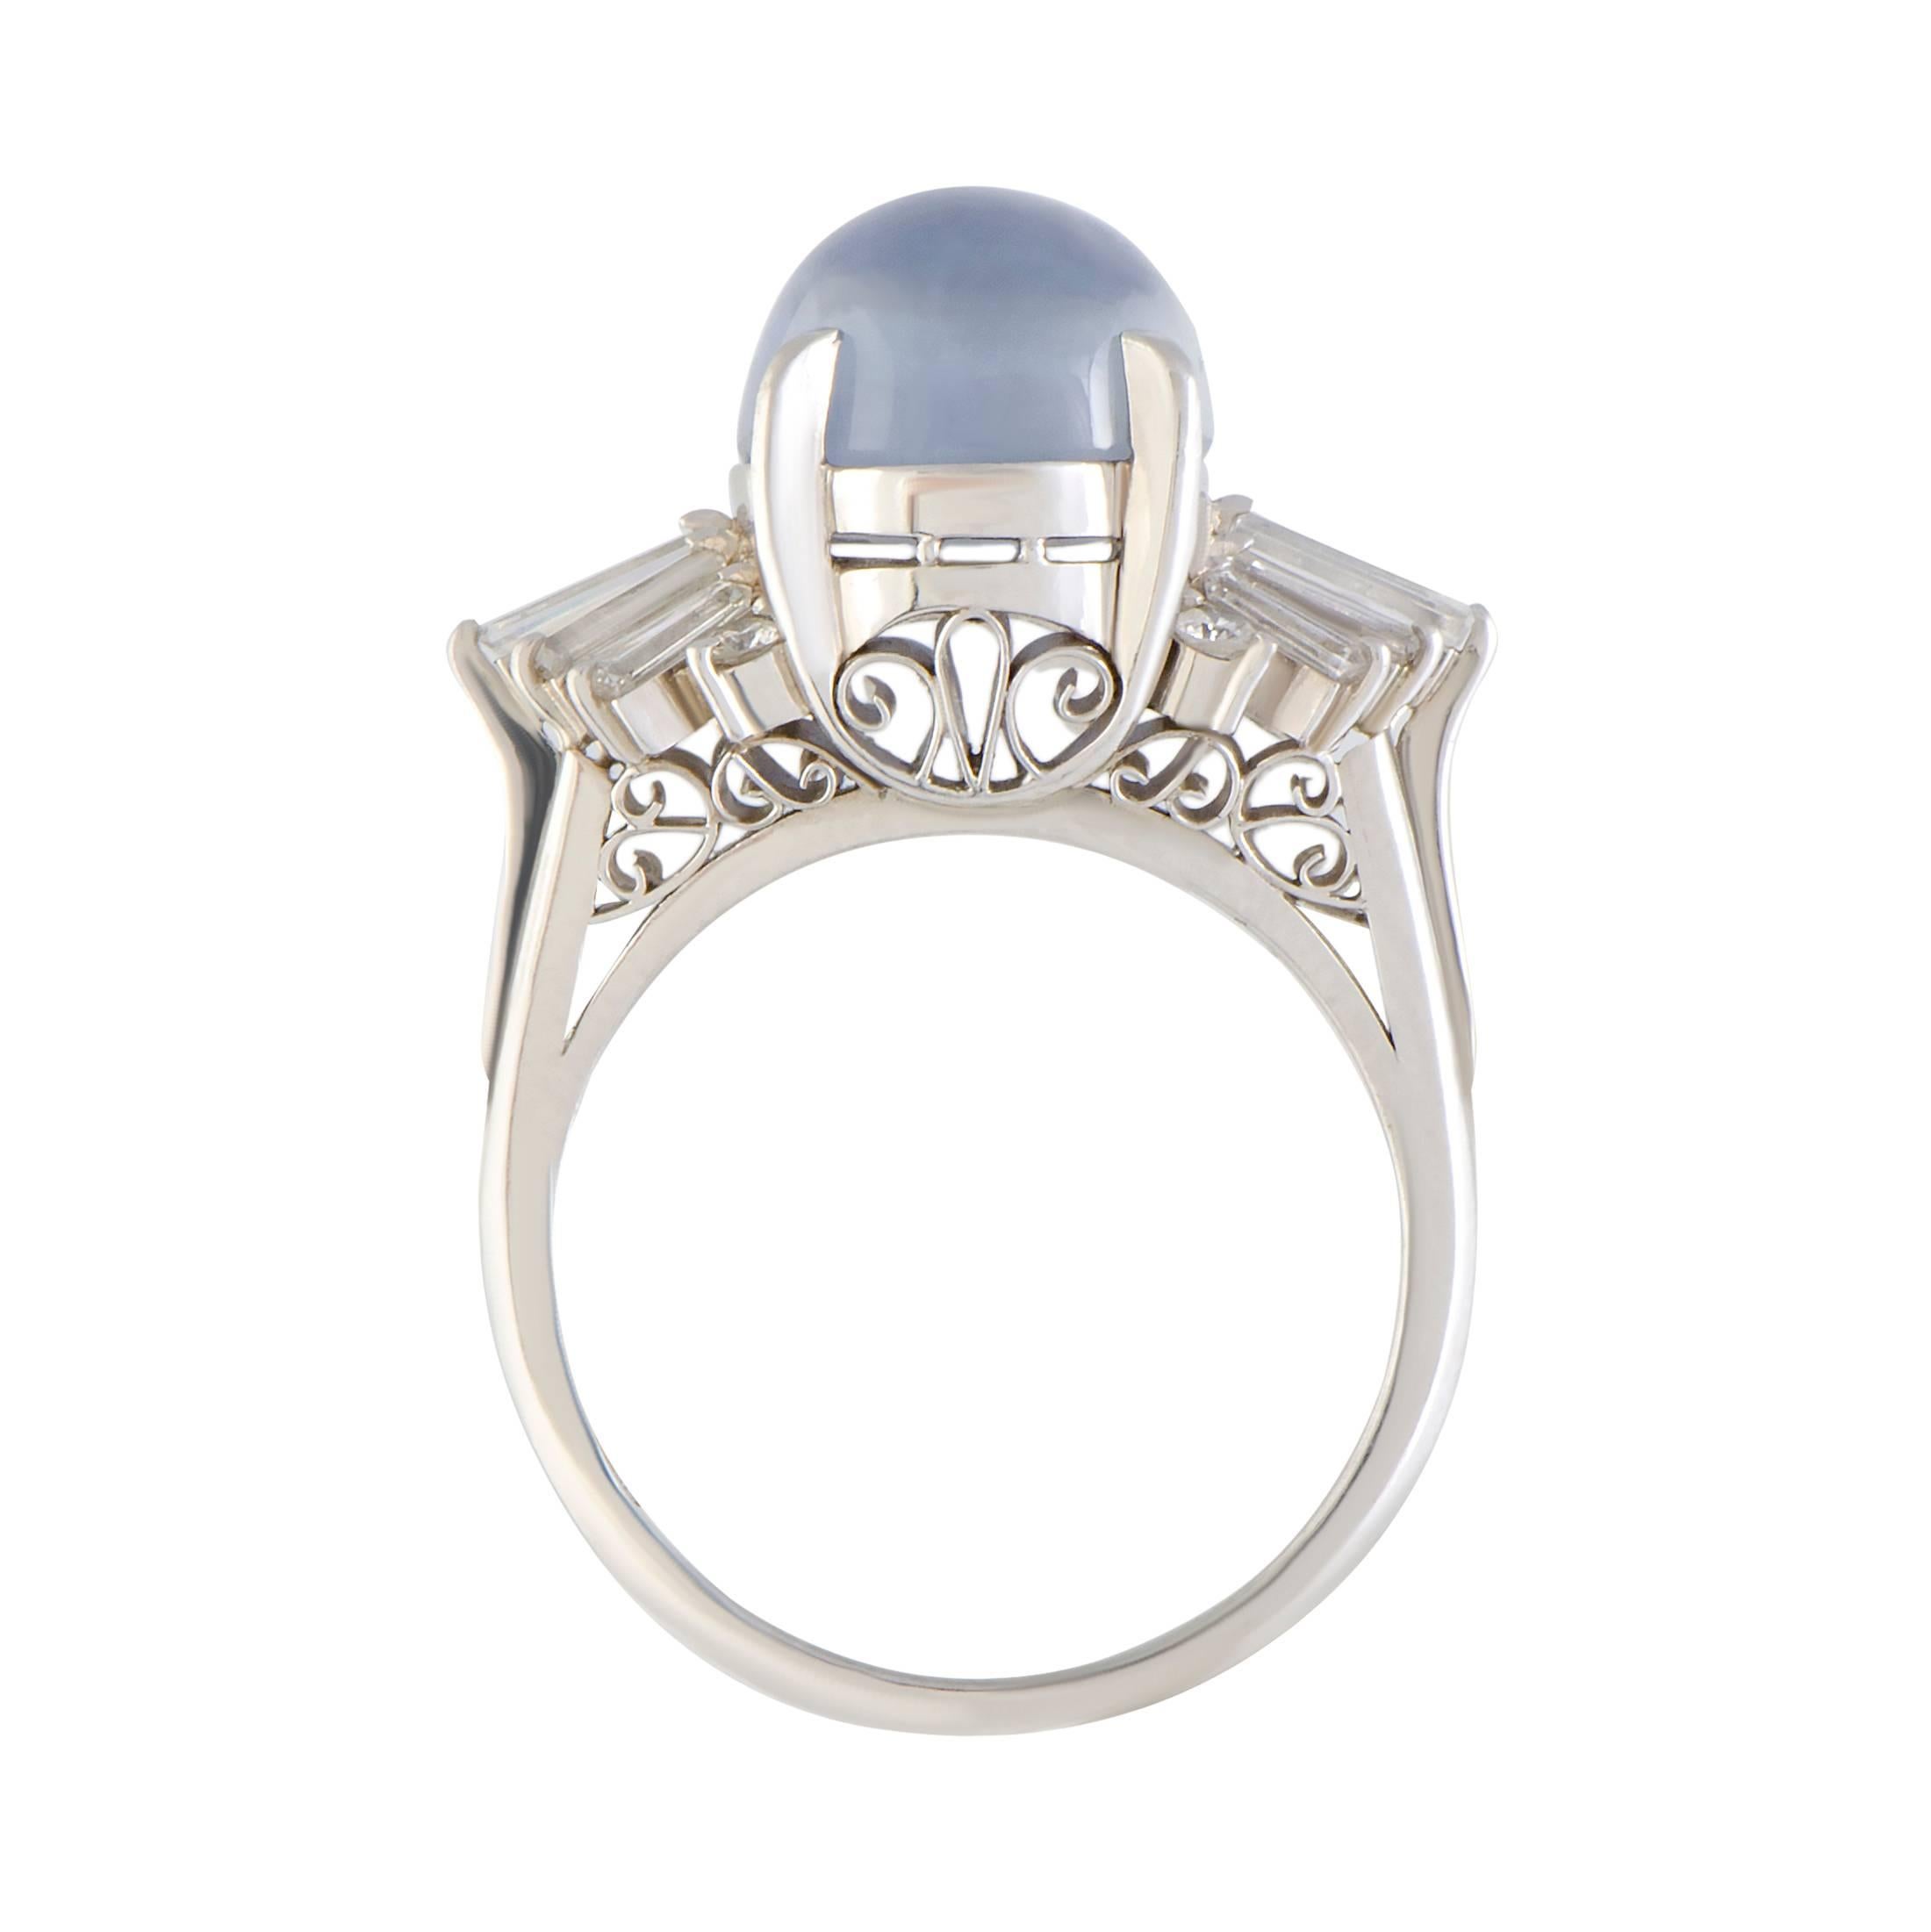 Endearingly feminine and incredibly elegant, this sublime ring enchants with its understated design and tasteful décor. The ring is made of platinum and boasts 0.89 carats of diamonds, while the central spot is reserved for a gorgeous sapphire that